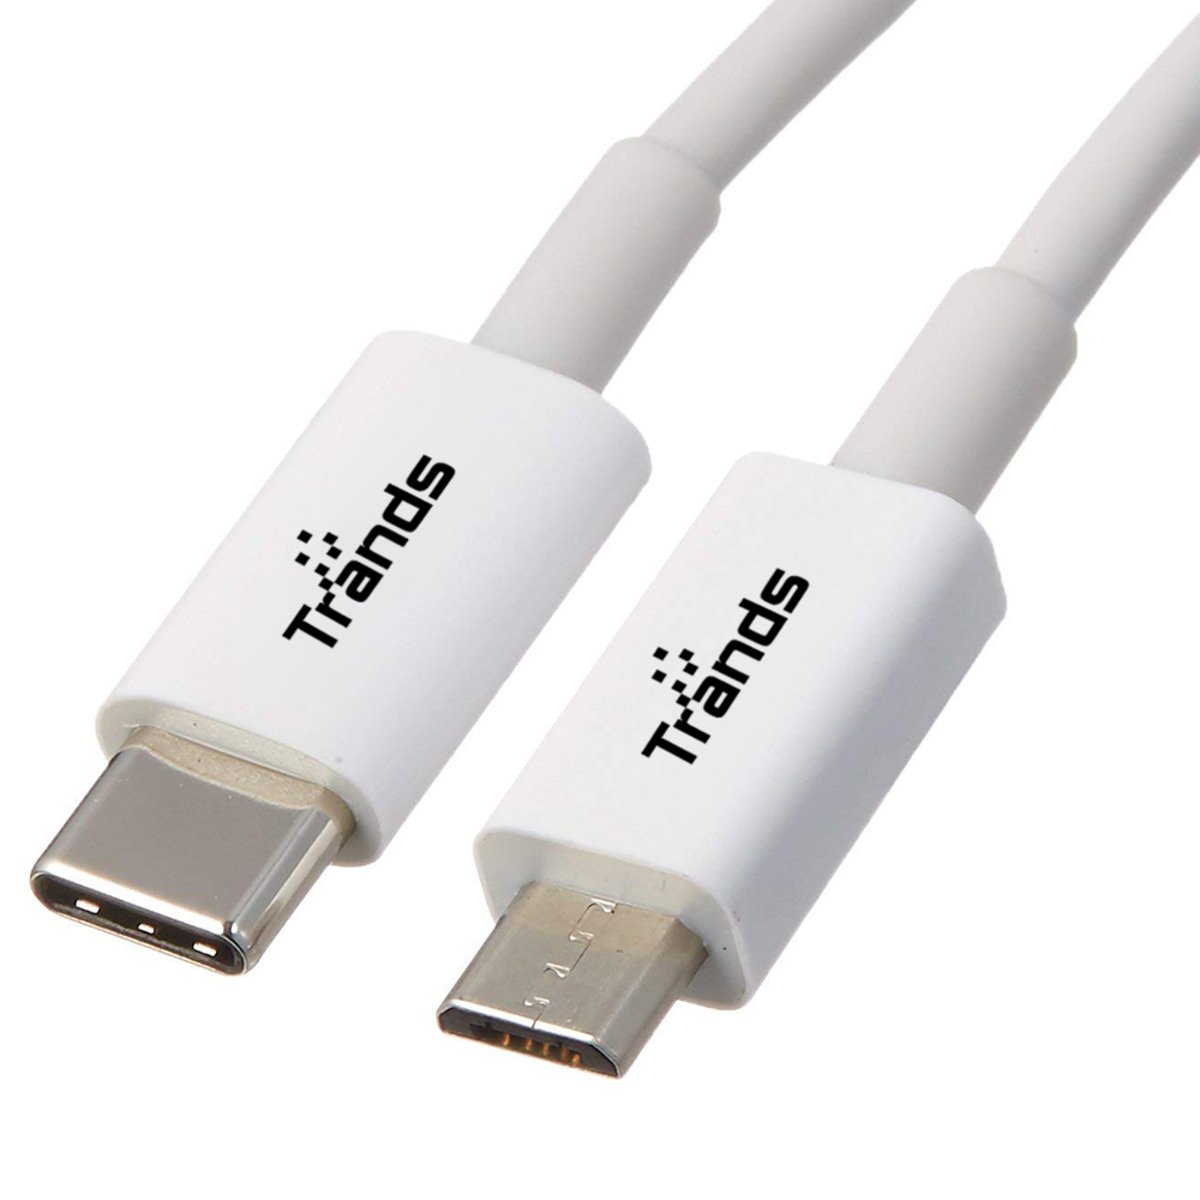 Trands Type C To Micro USB 1 Meter Cable CA4380